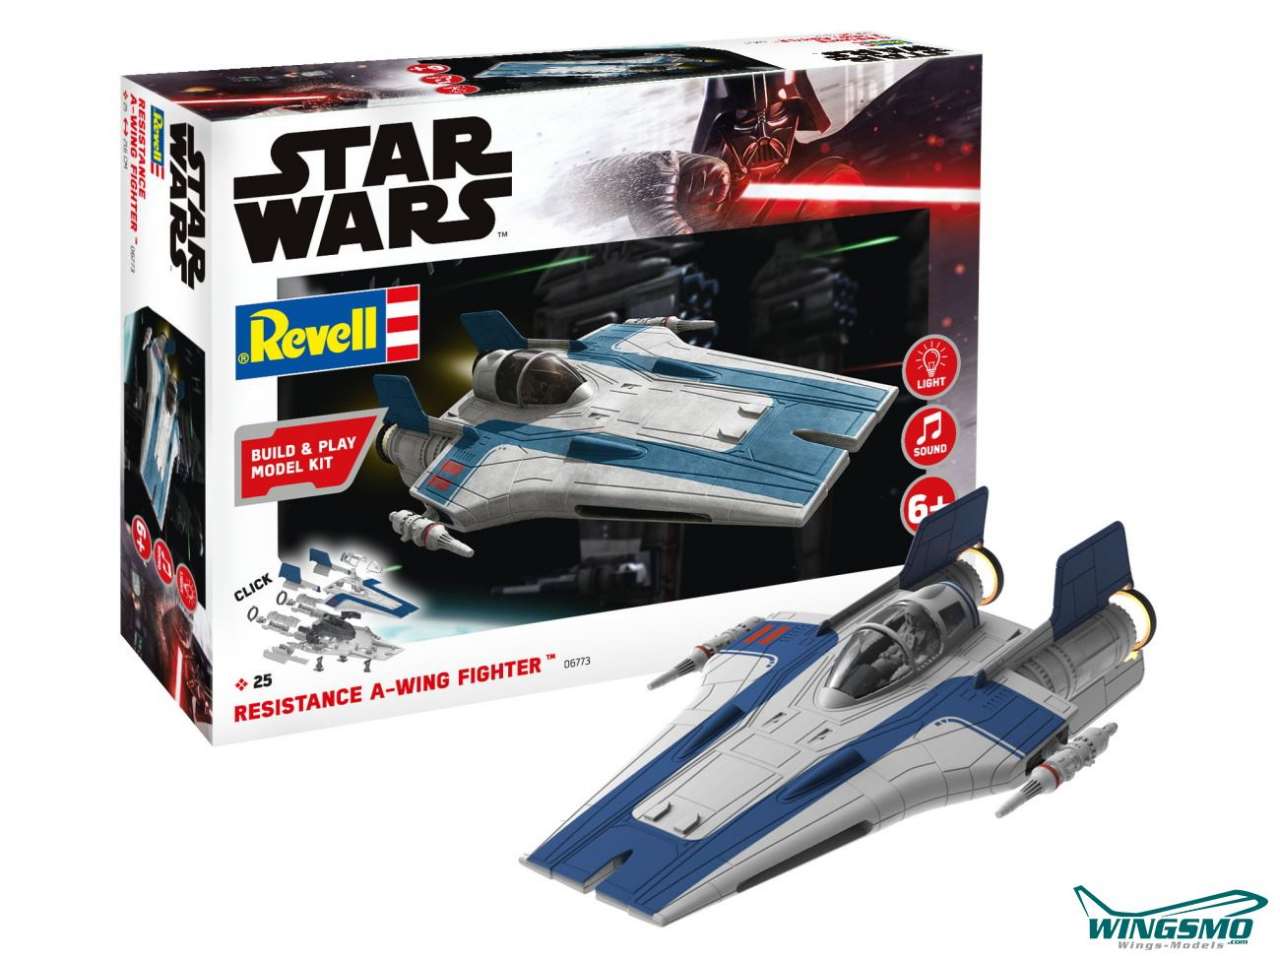 Revell Star Wars Resistance A-Wing Fighter Blau 1:44 06773